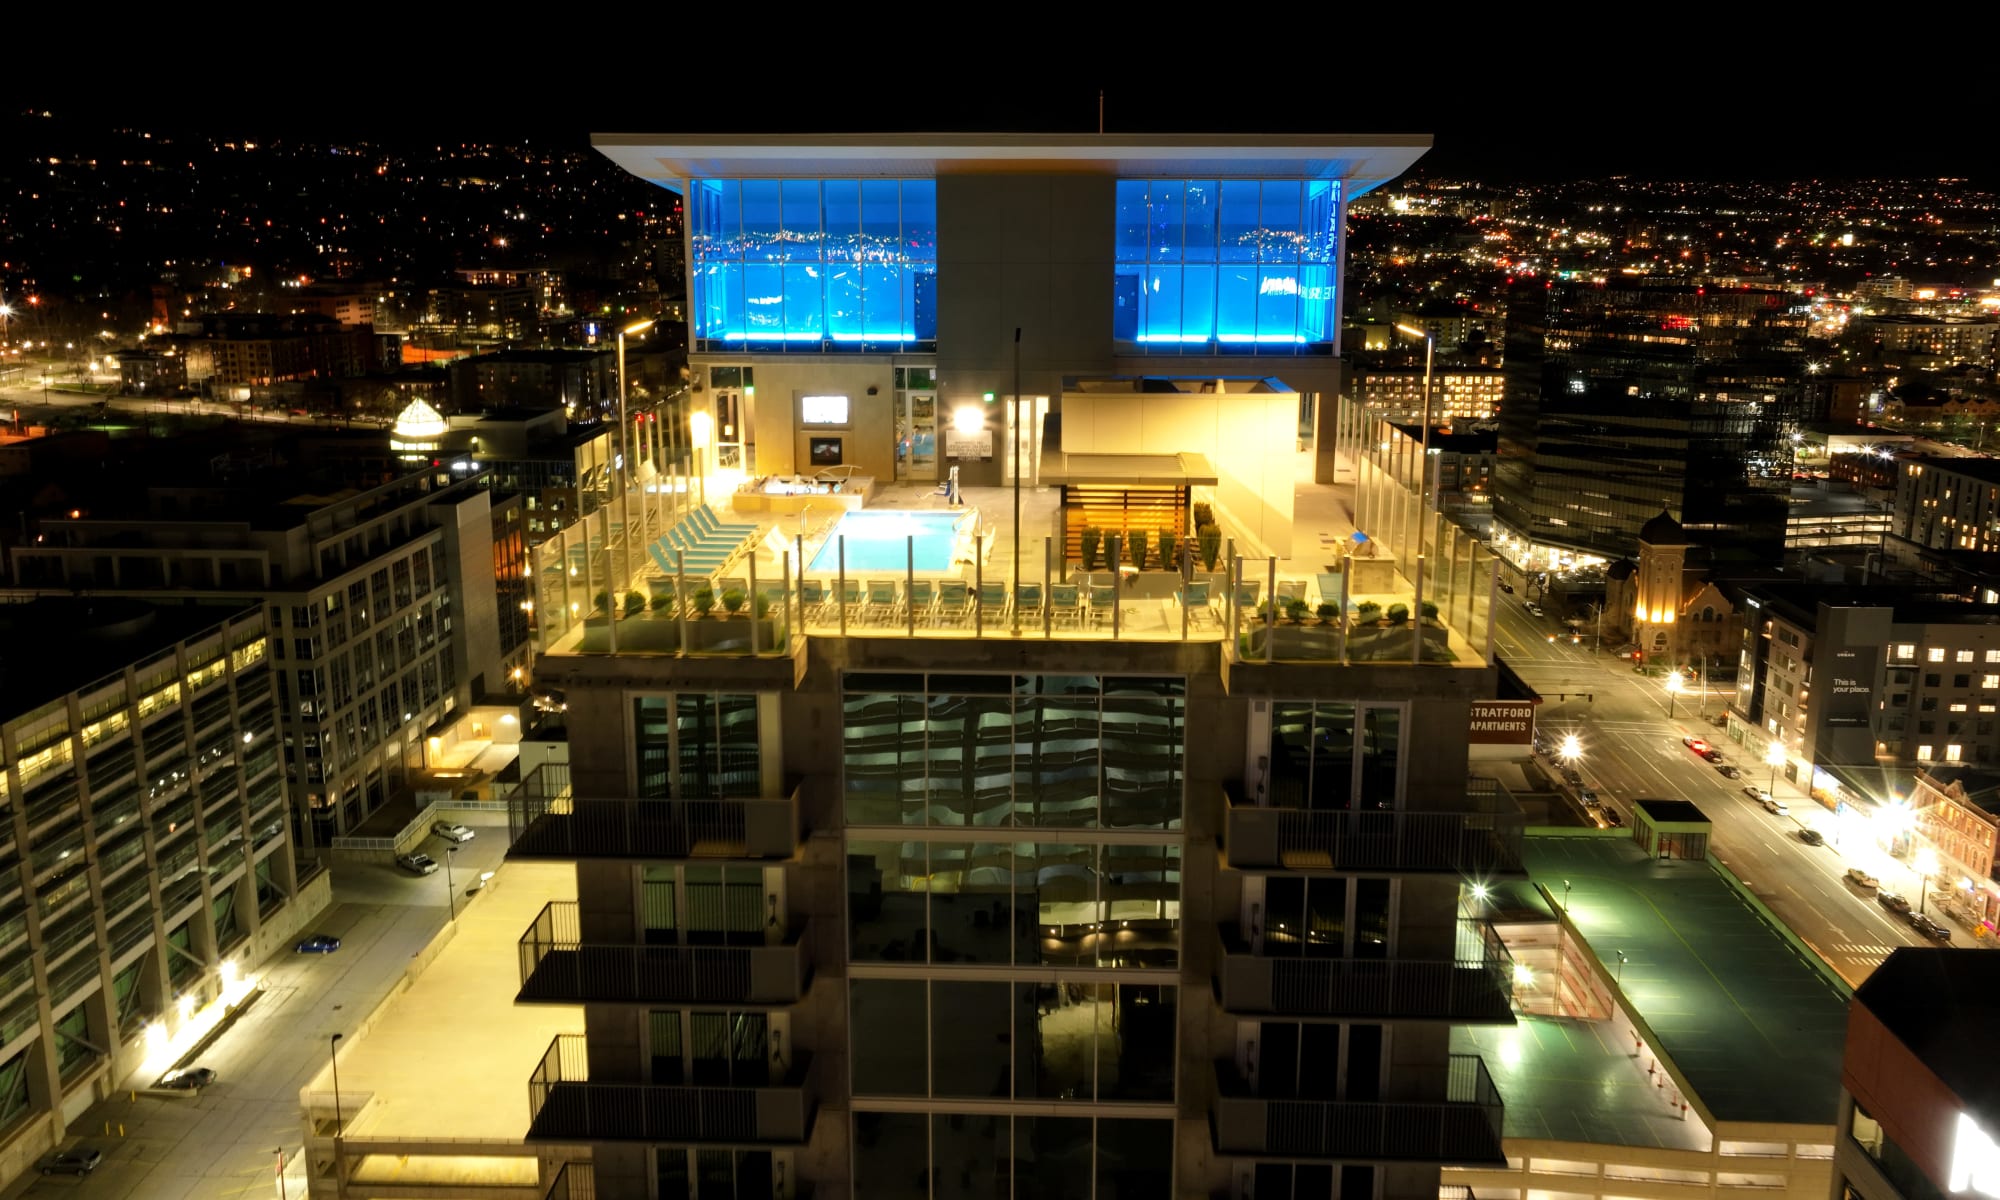 View of 21st floor amenities at night from the west side at Luxury high-rise community of Liberty SKY in Salt Lake City, Utah